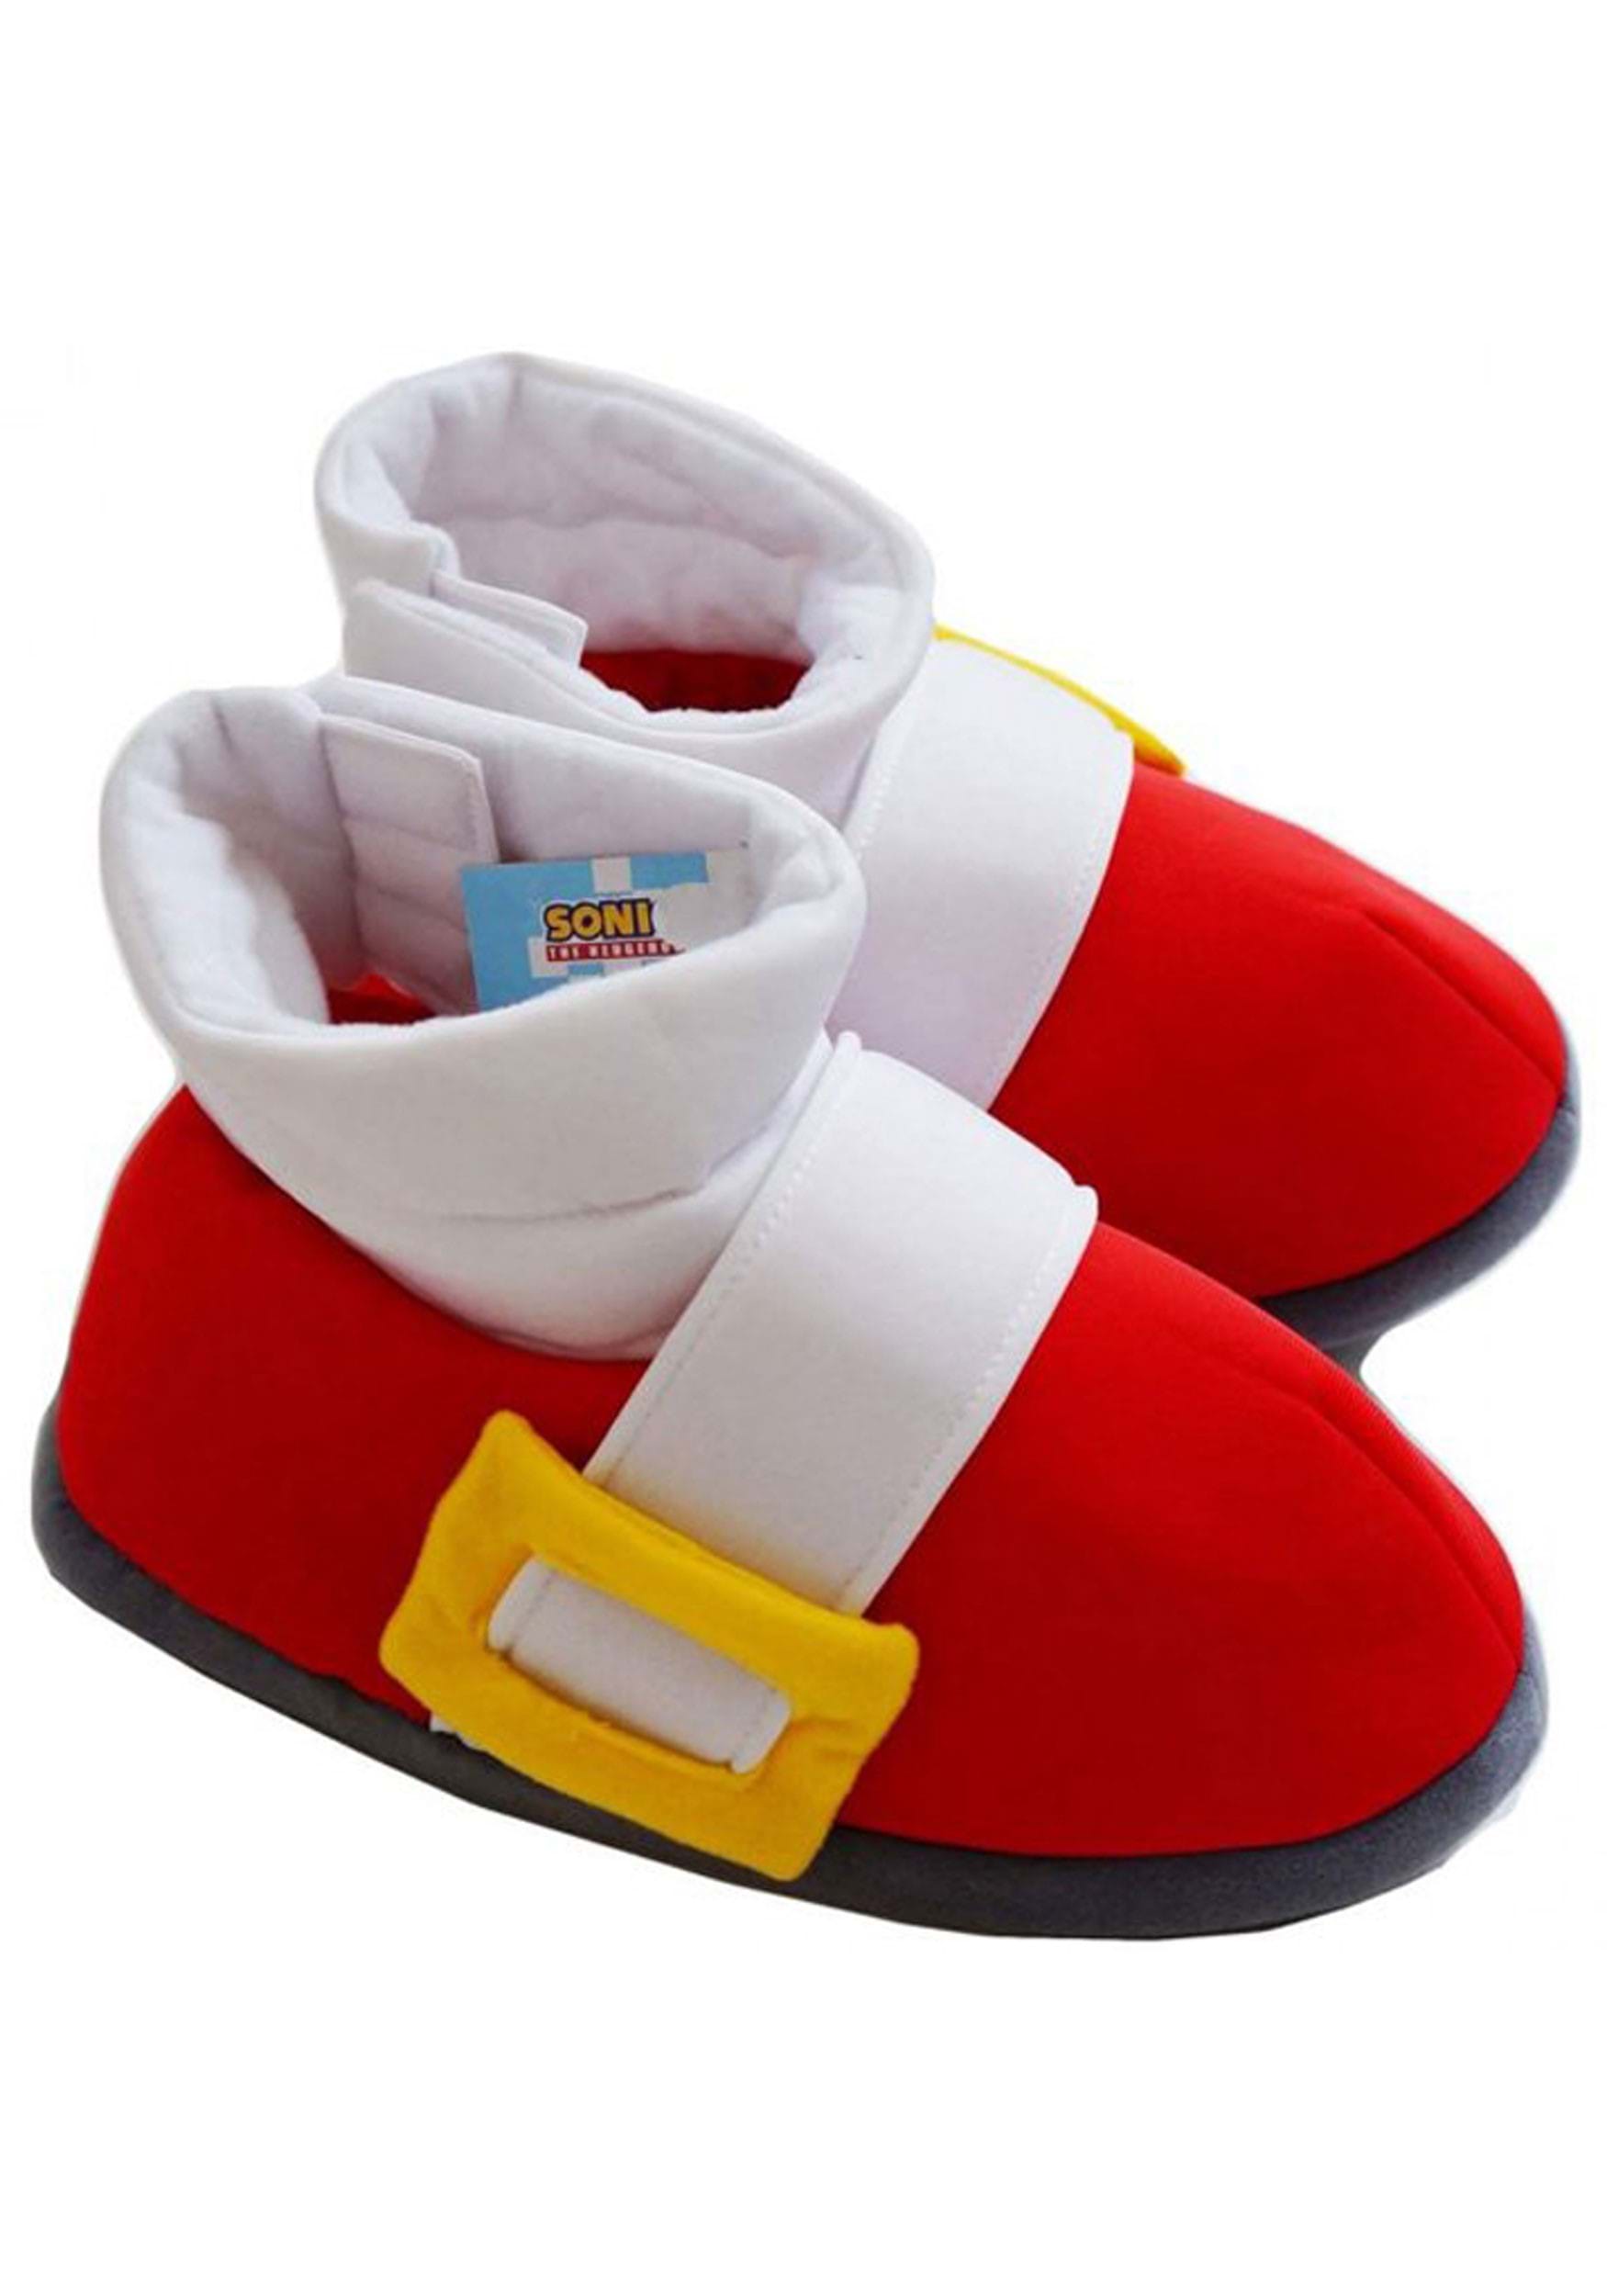 Sonic the Hedgehog- Plush Adult Sonic Cosplay Slippers